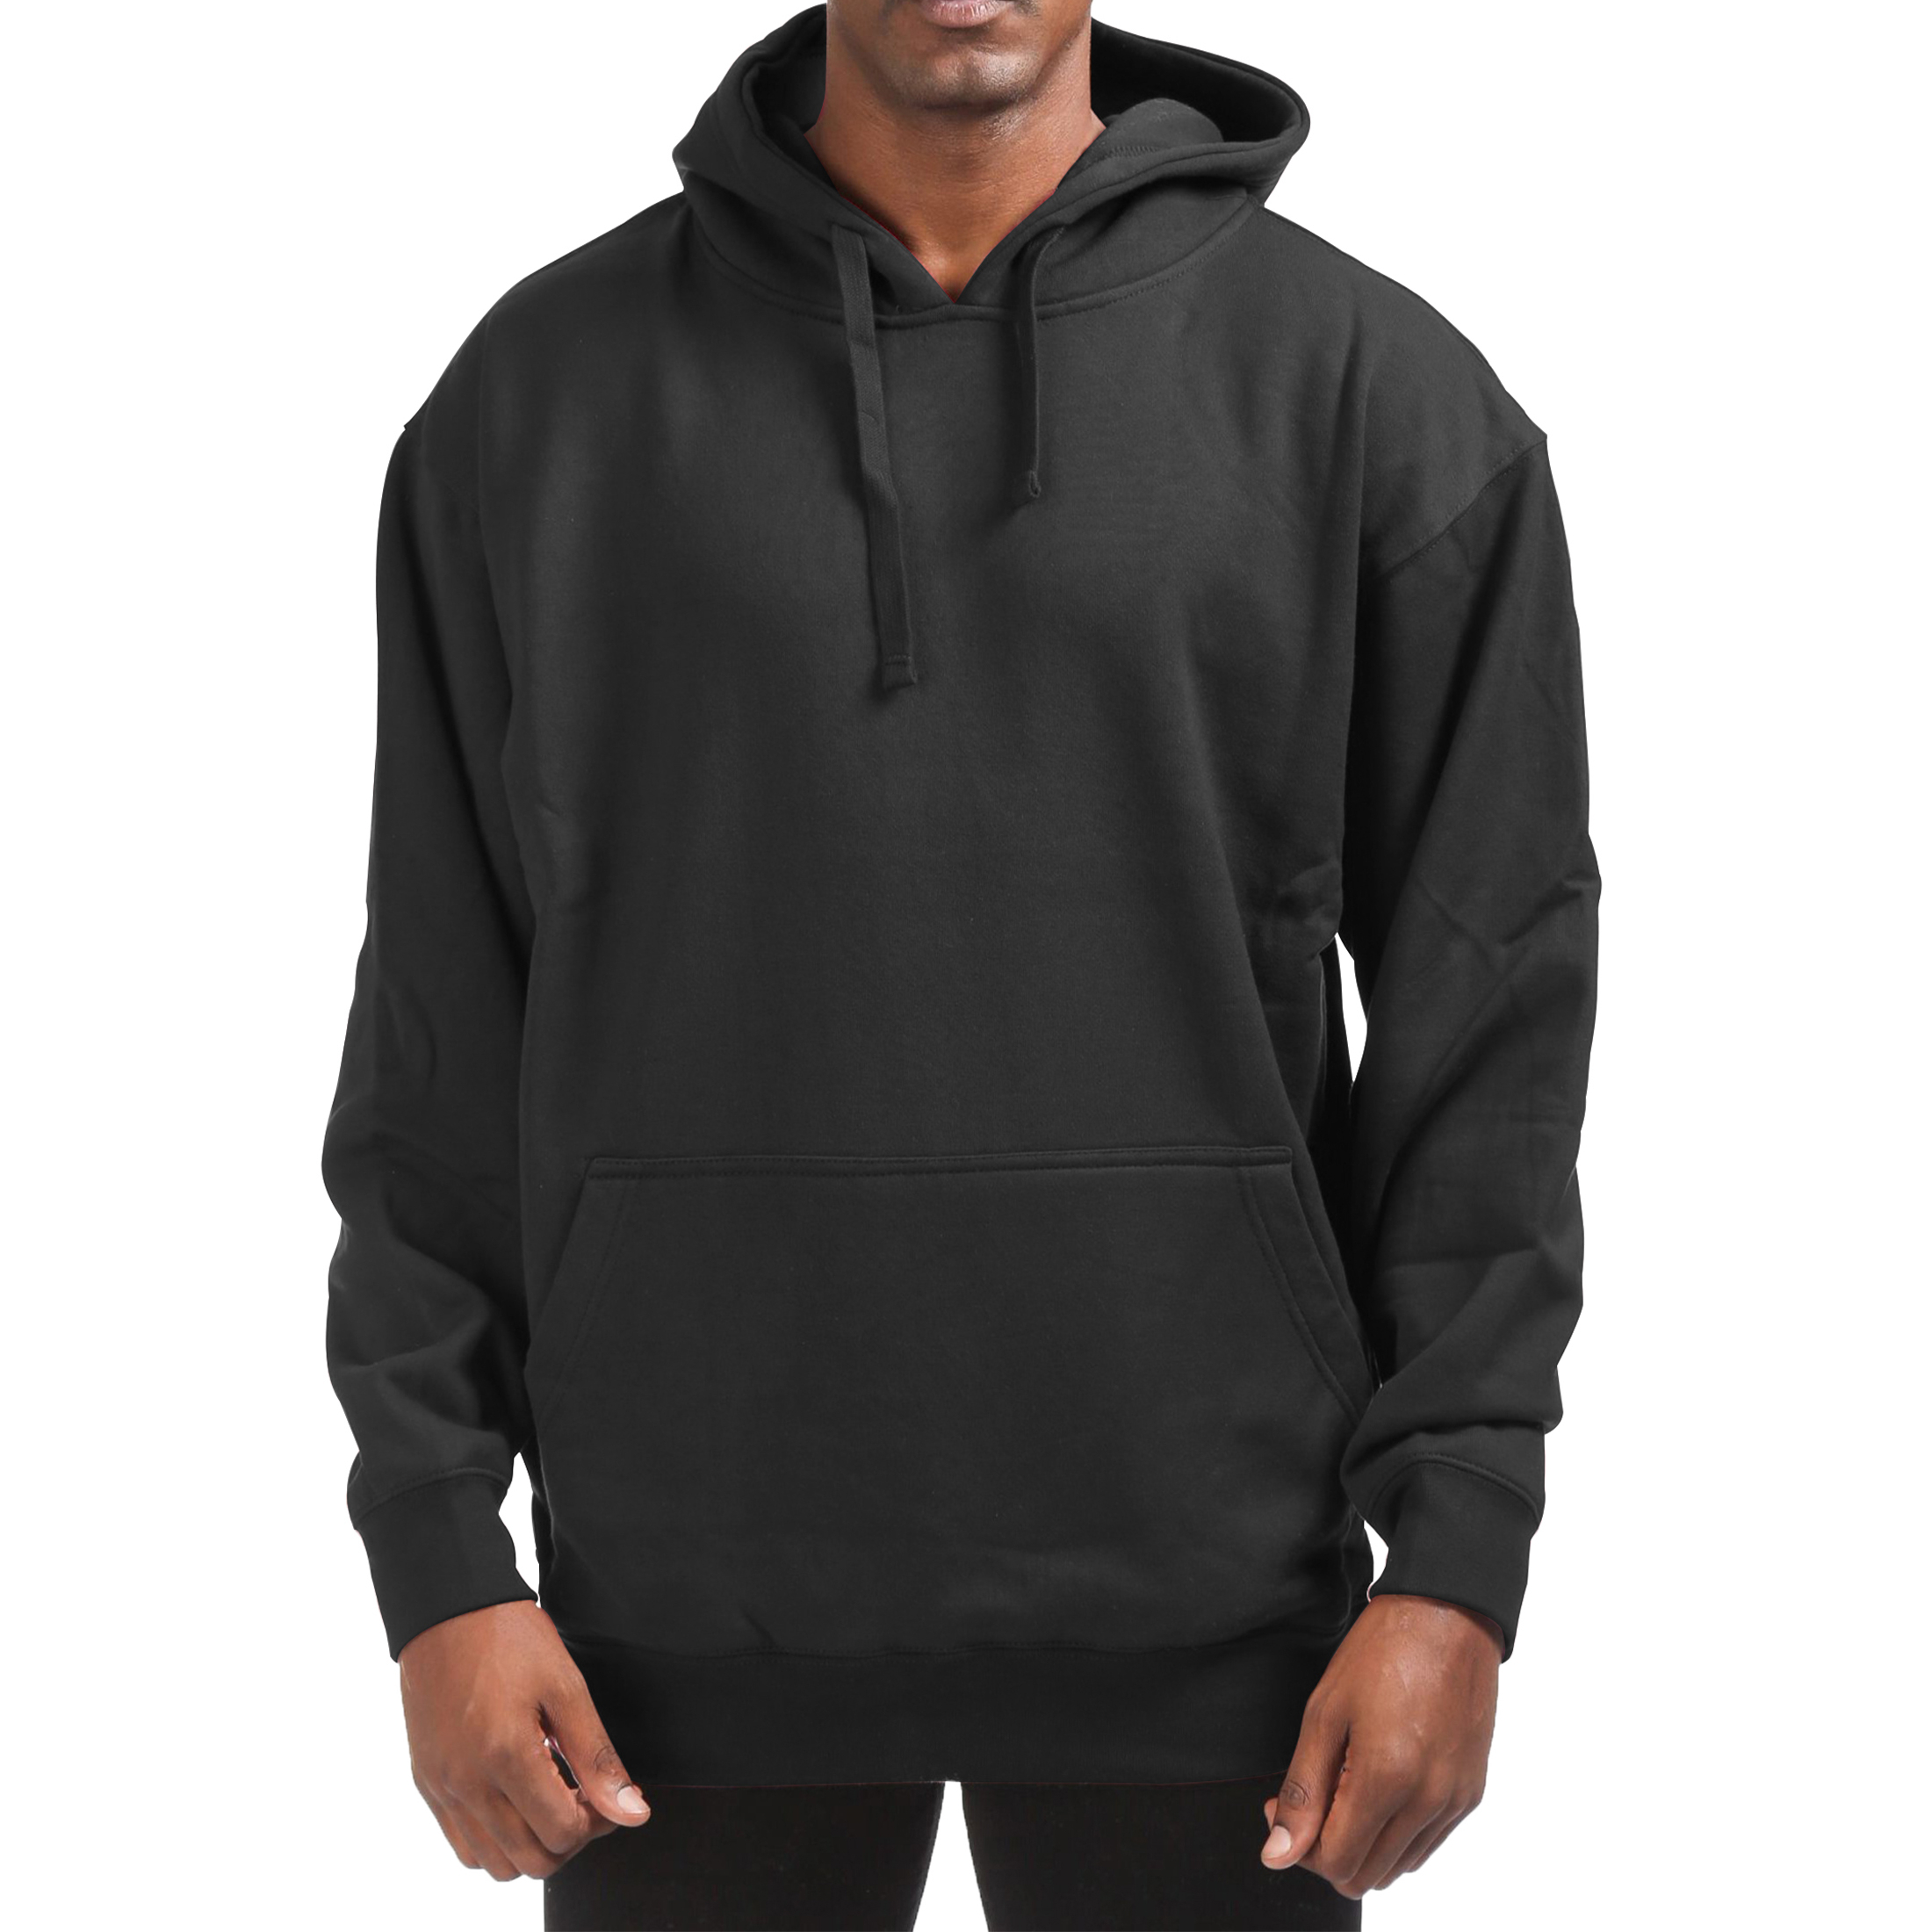 Men's Cotton-Blend Fleece Pullover Hoodie With Pocket (Big & Tall Sizes Available) - Black, Medium